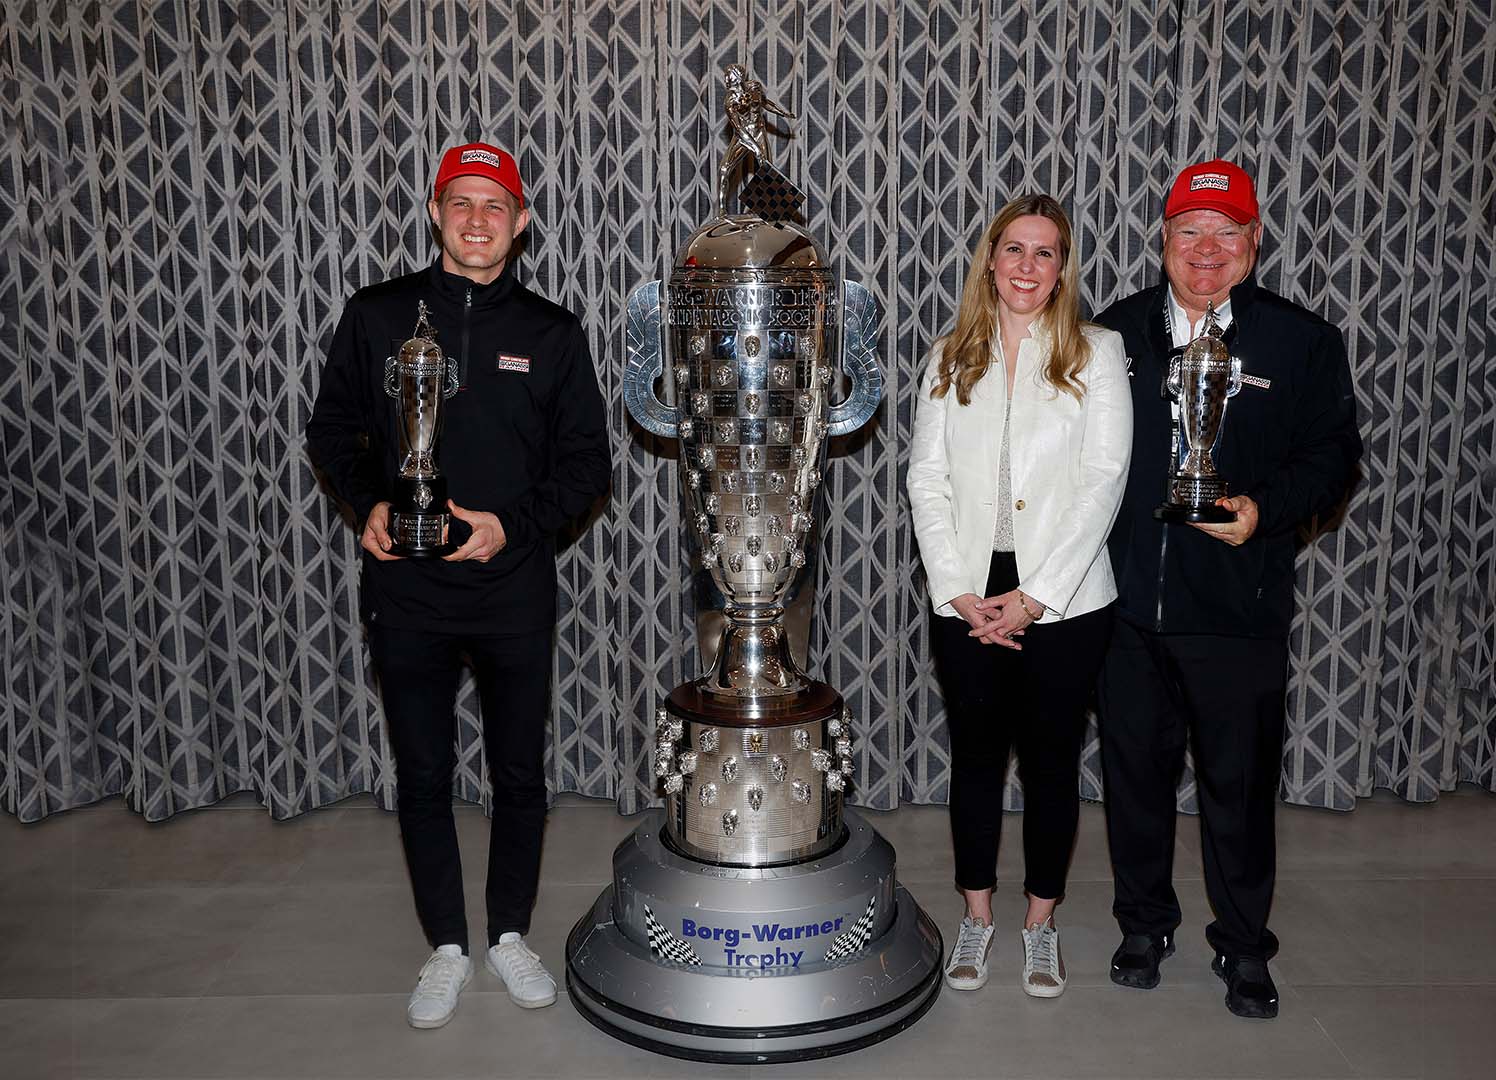 Three people in line stand around large silver trophy holding smaller trophies and smiling